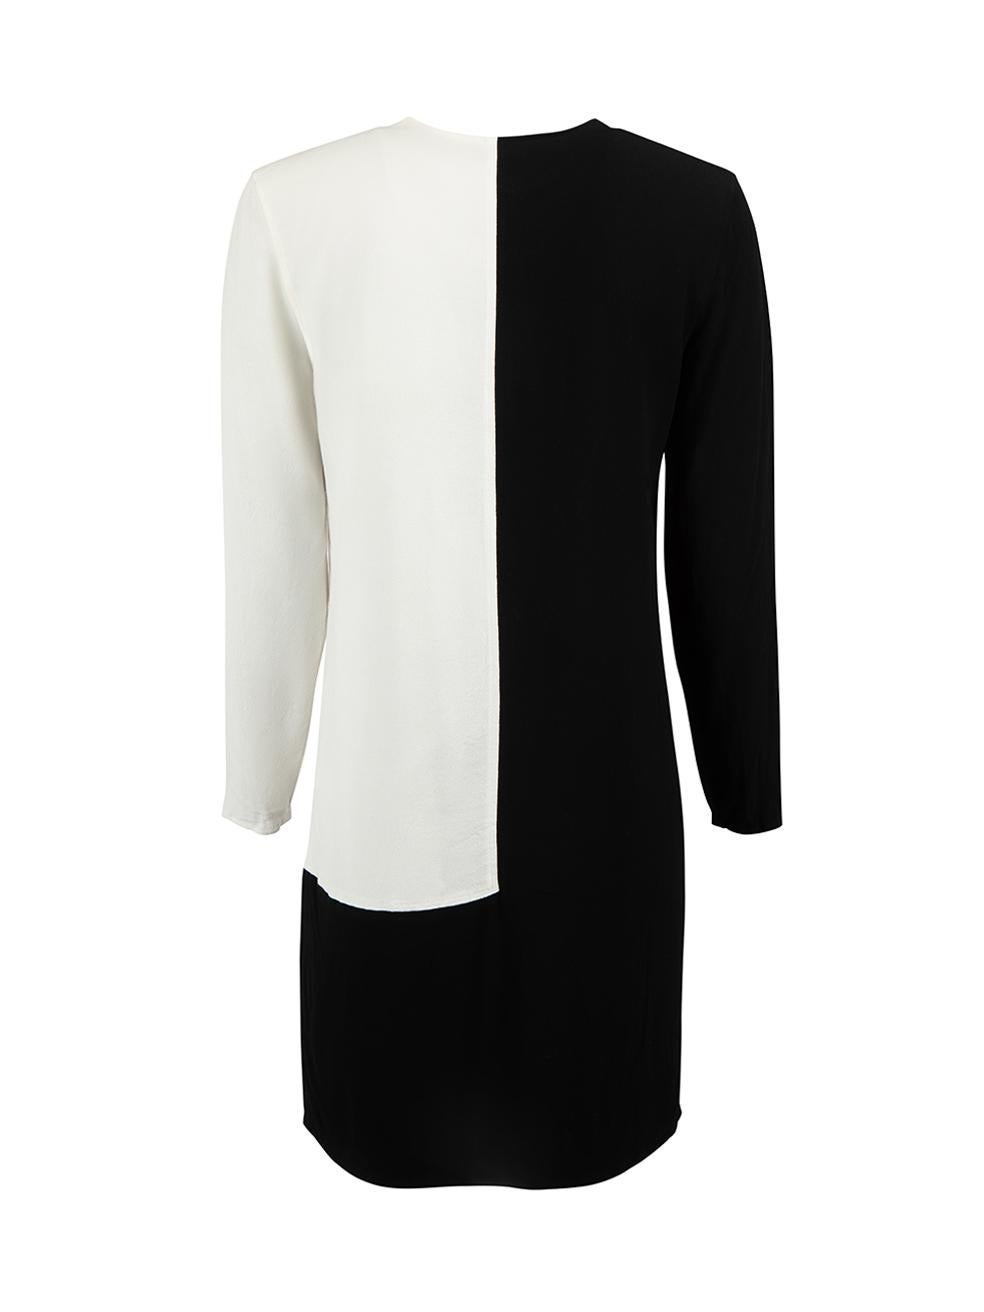 Equipment Femme Black Colour Block Panelling Long Sleeve Mini Dress Size S In Good Condition In London, GB